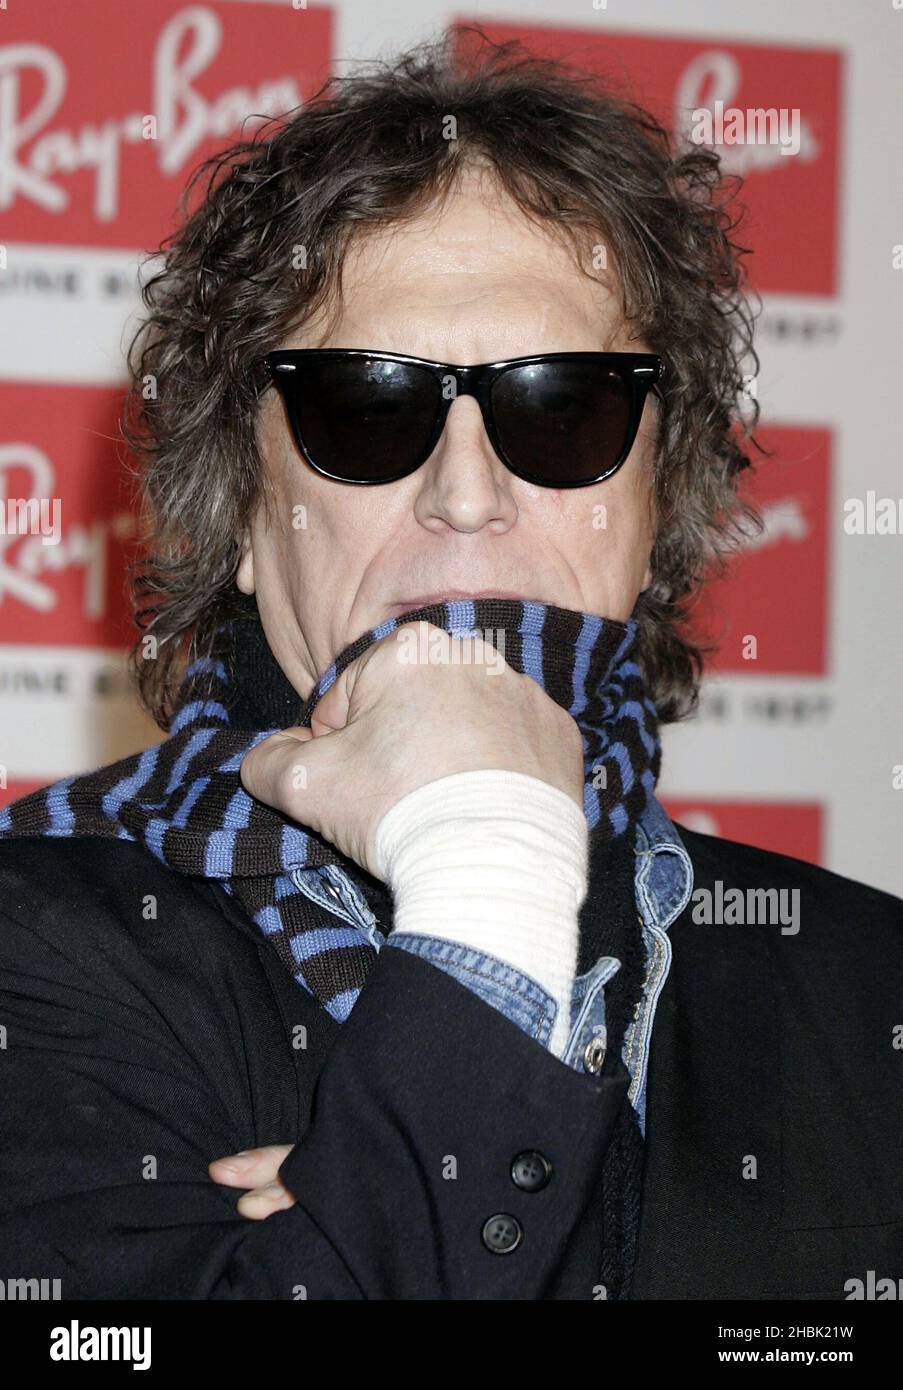 Mick Rock arriving at the Ray-Ban Wayfarer Uncut Sessions Photocall at the  Electric Ballroom on December 12, 2006 in London Stock Photo - Alamy